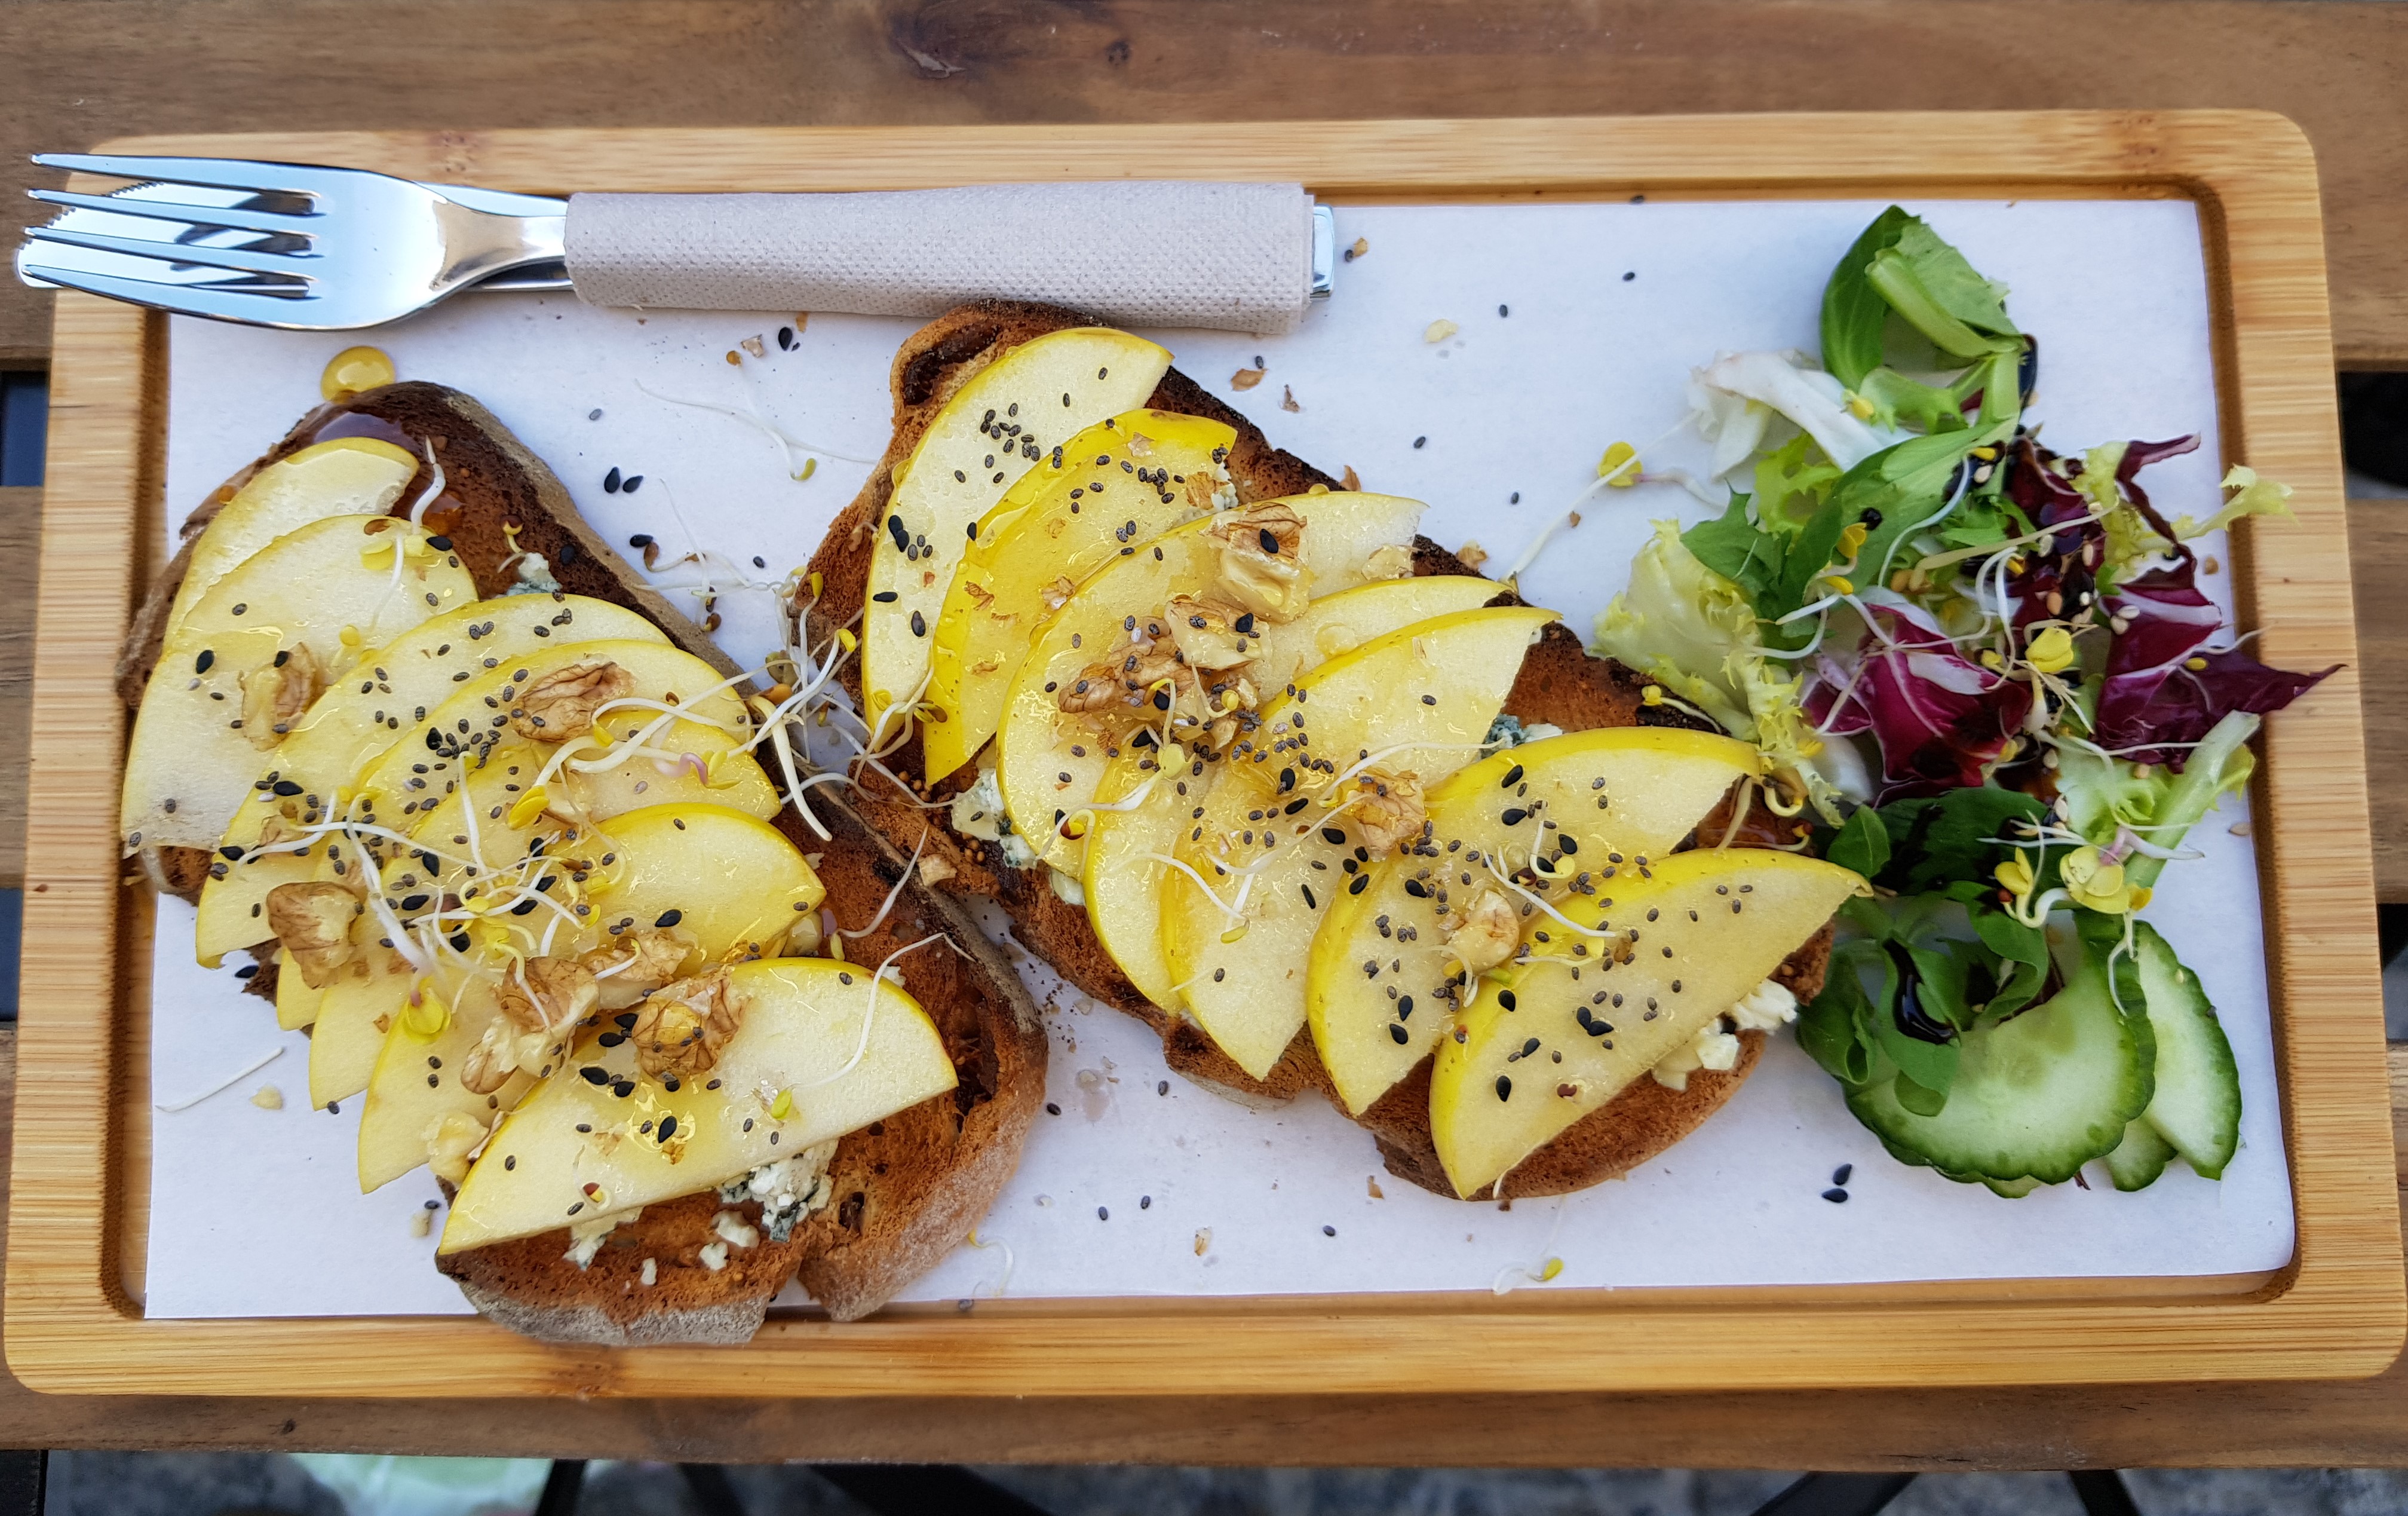 Toast with apple, blue cheese, and walnuts at Parcería Café.